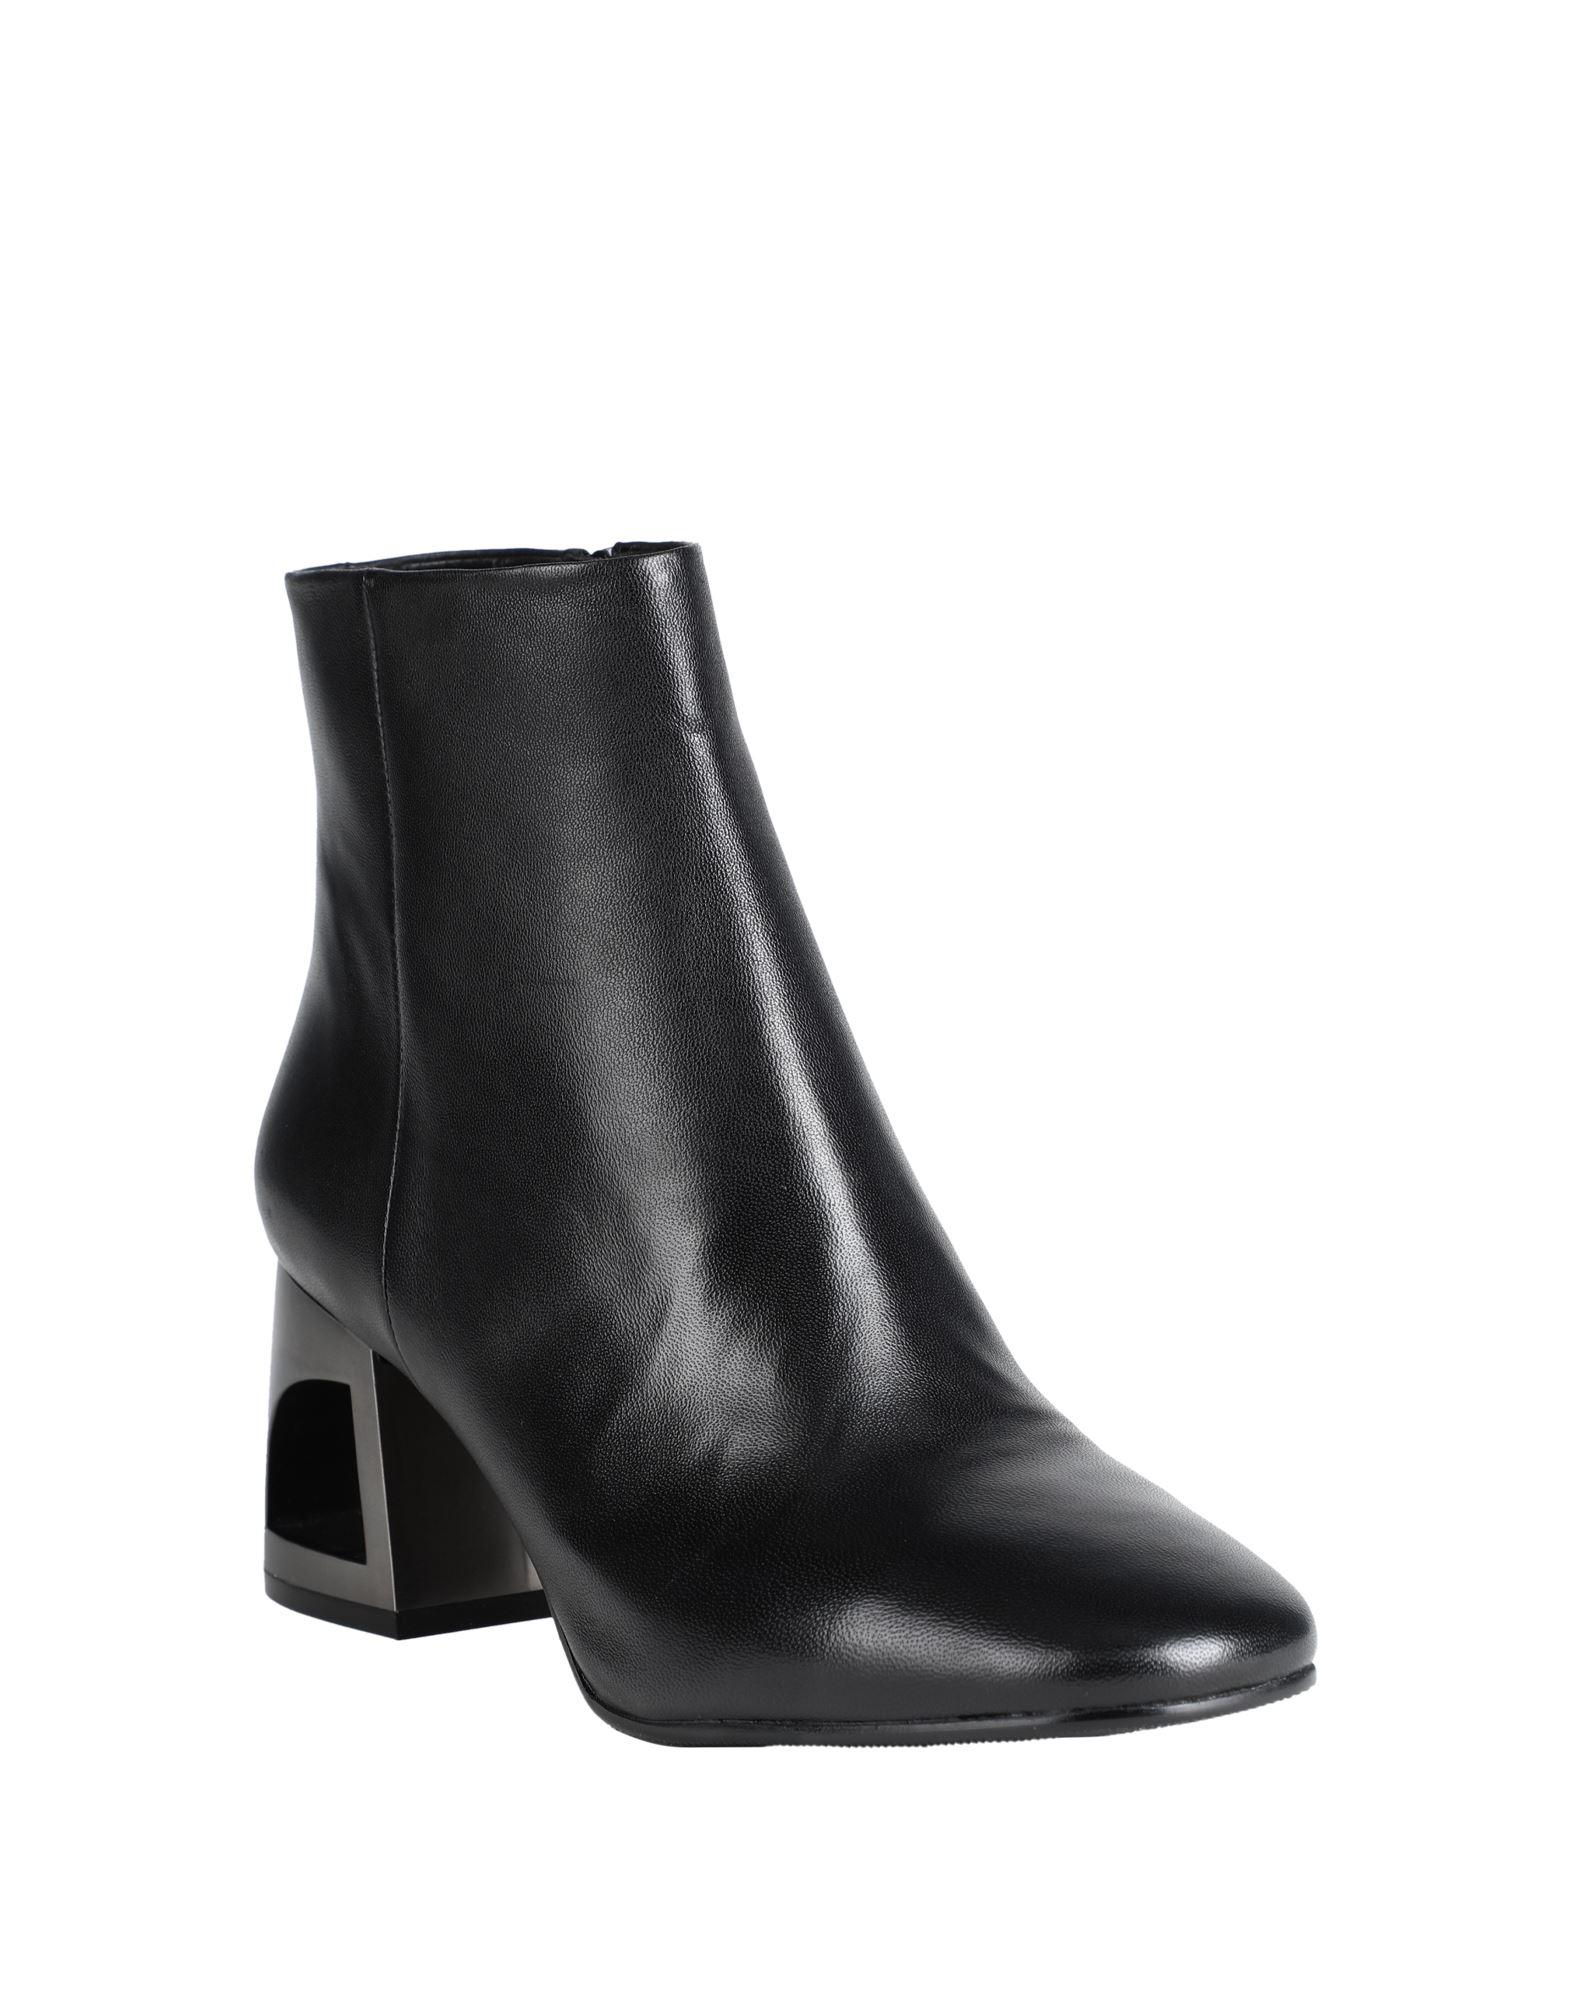 Adele Dezotti Ankle Boots in Black | Lyst